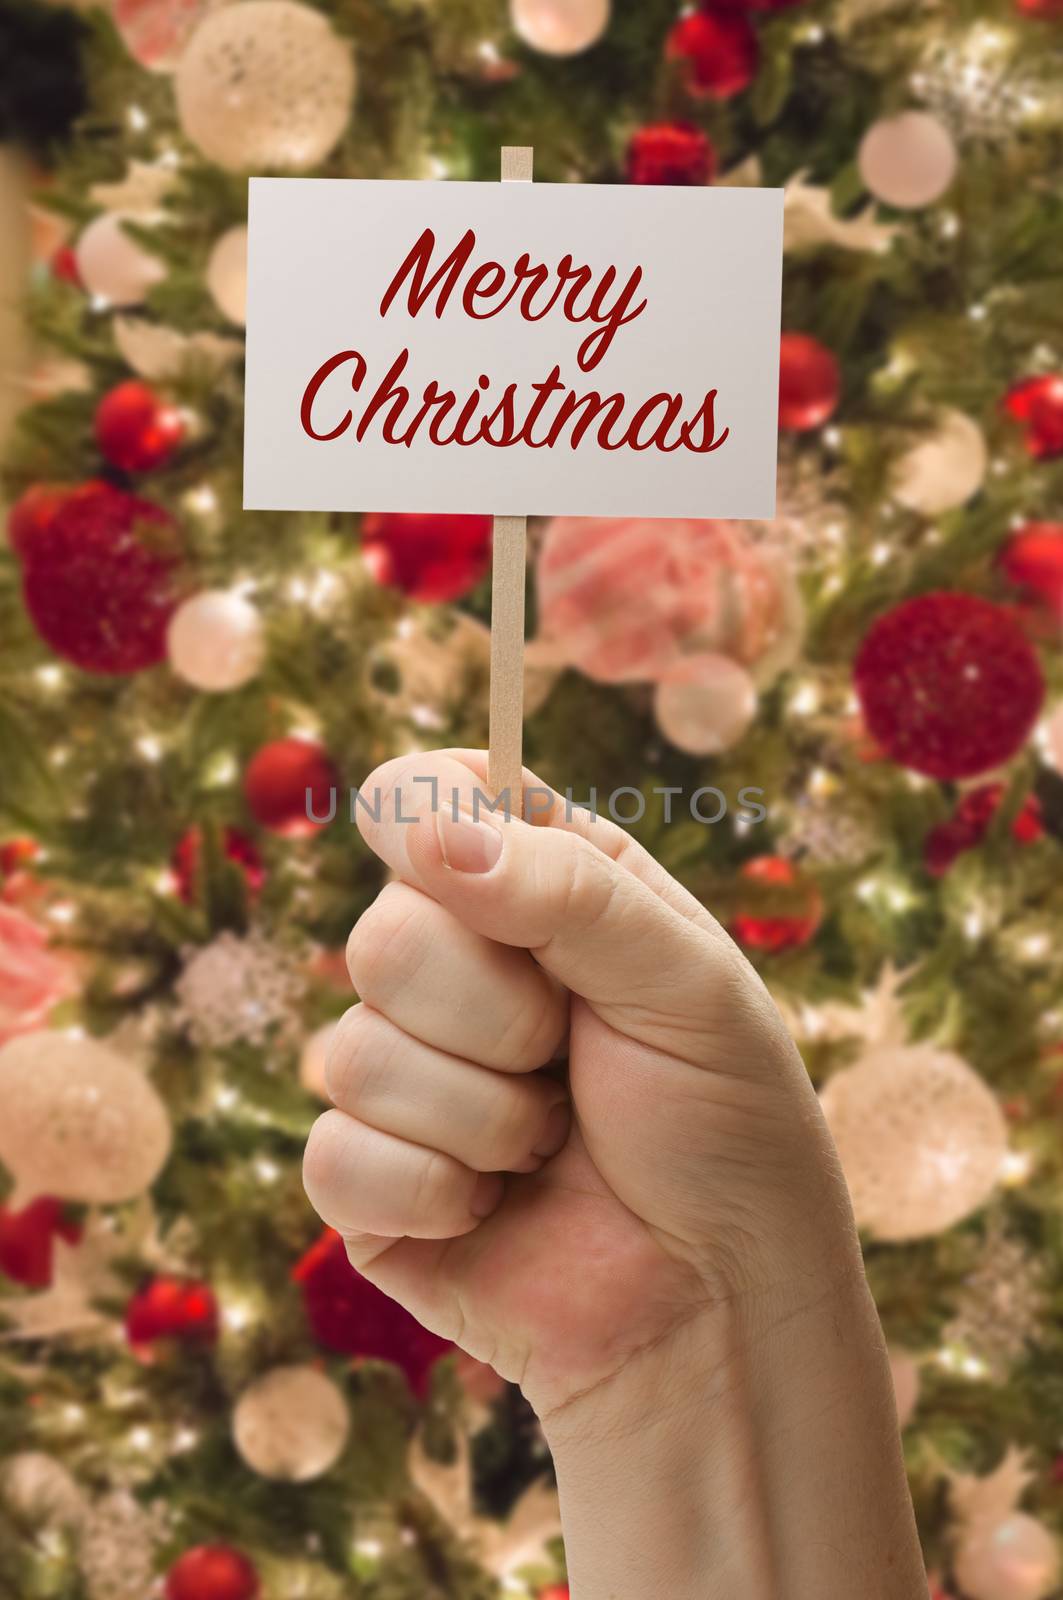 Hand Holding Merry Christmas Card In Front of Decorated Christmas Tree.